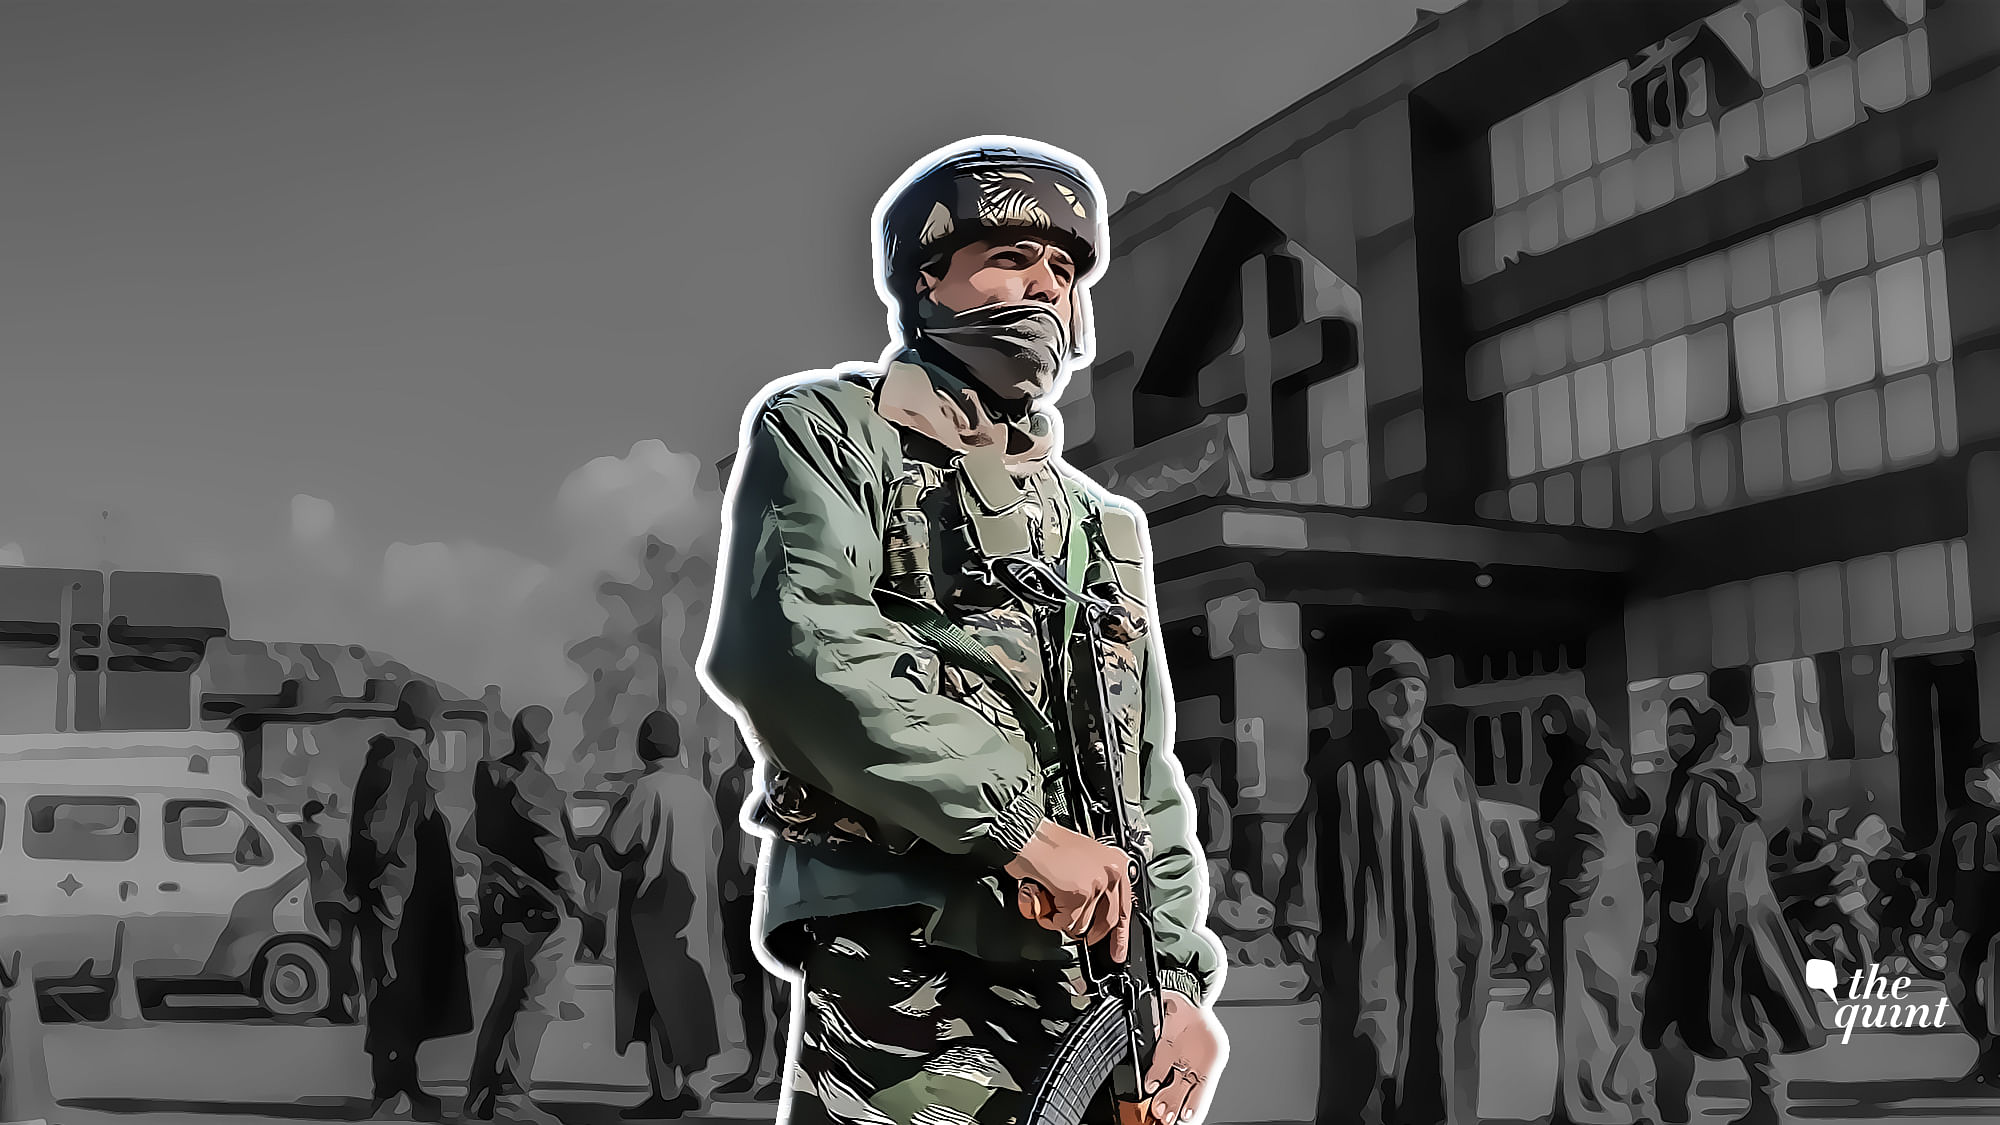 Image of an armed security personnel outside Srinagar’s SMHS Hospital used for representational purposes.&nbsp; &nbsp;